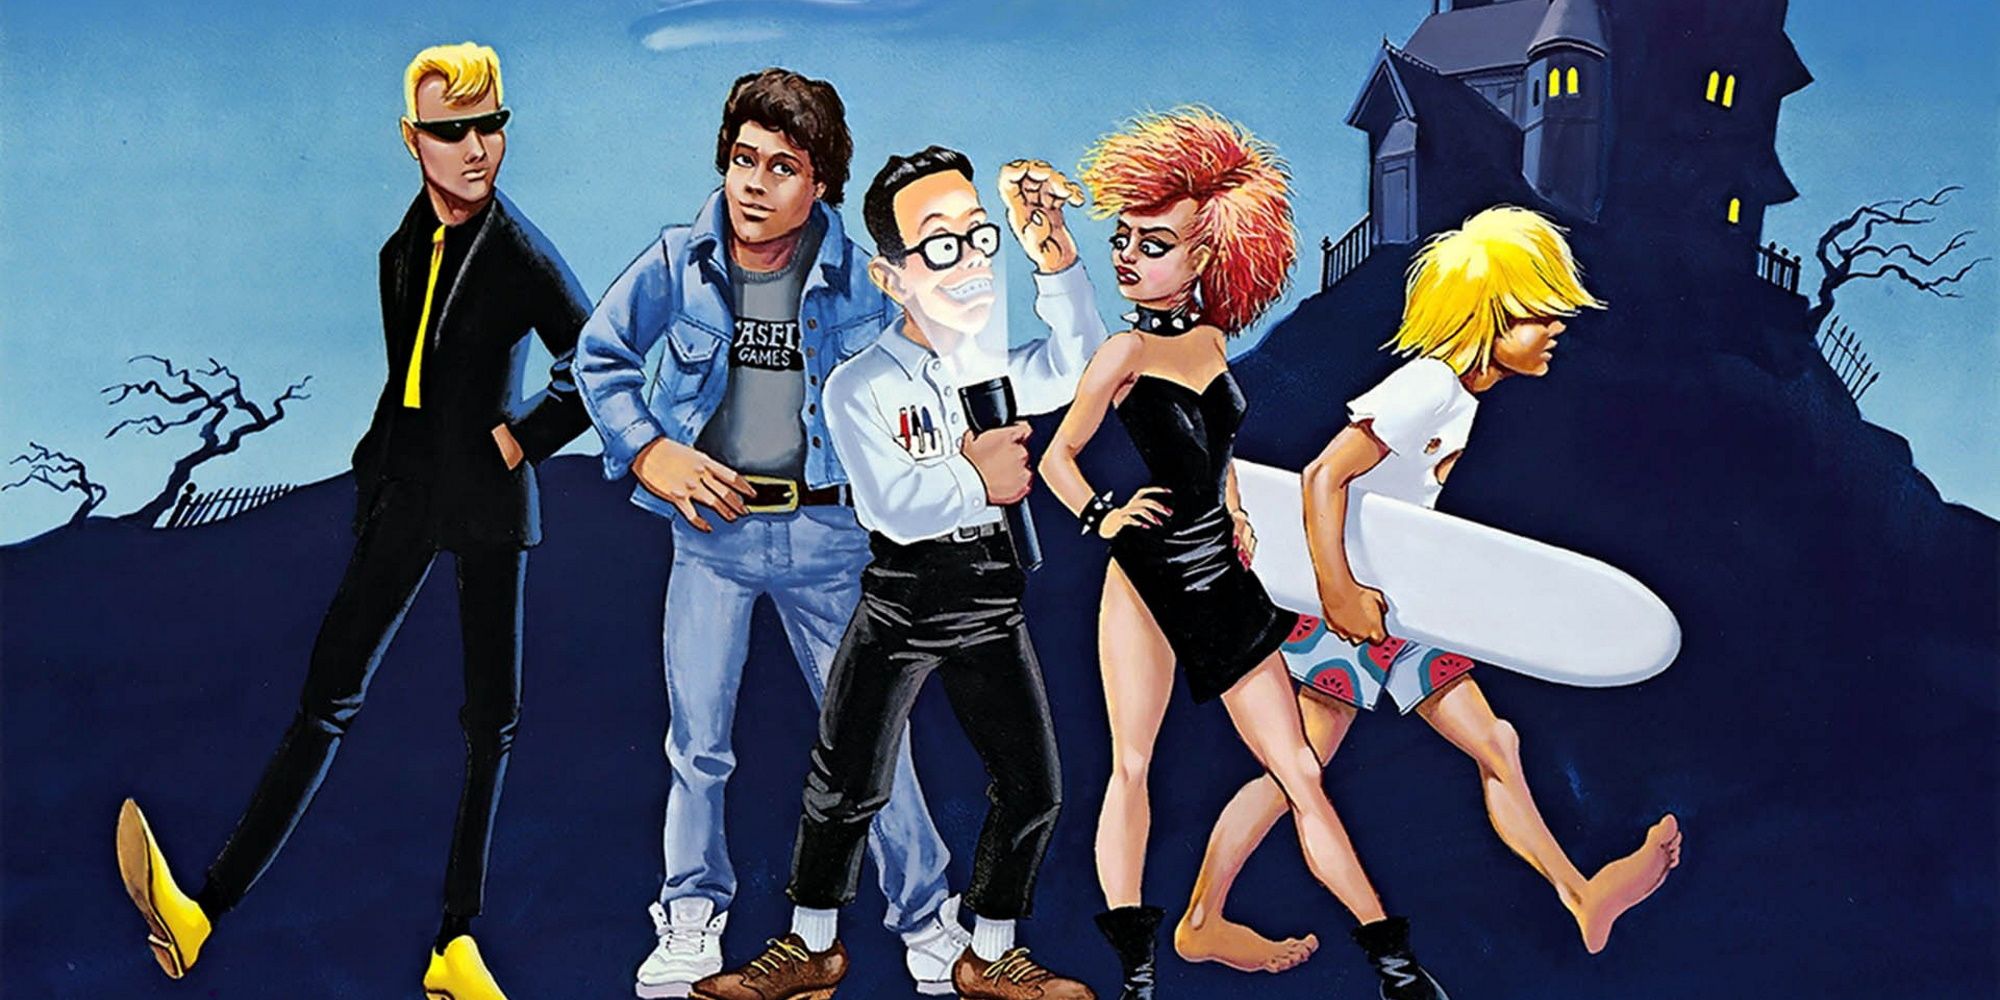 introductory characters in Maniac Mansion